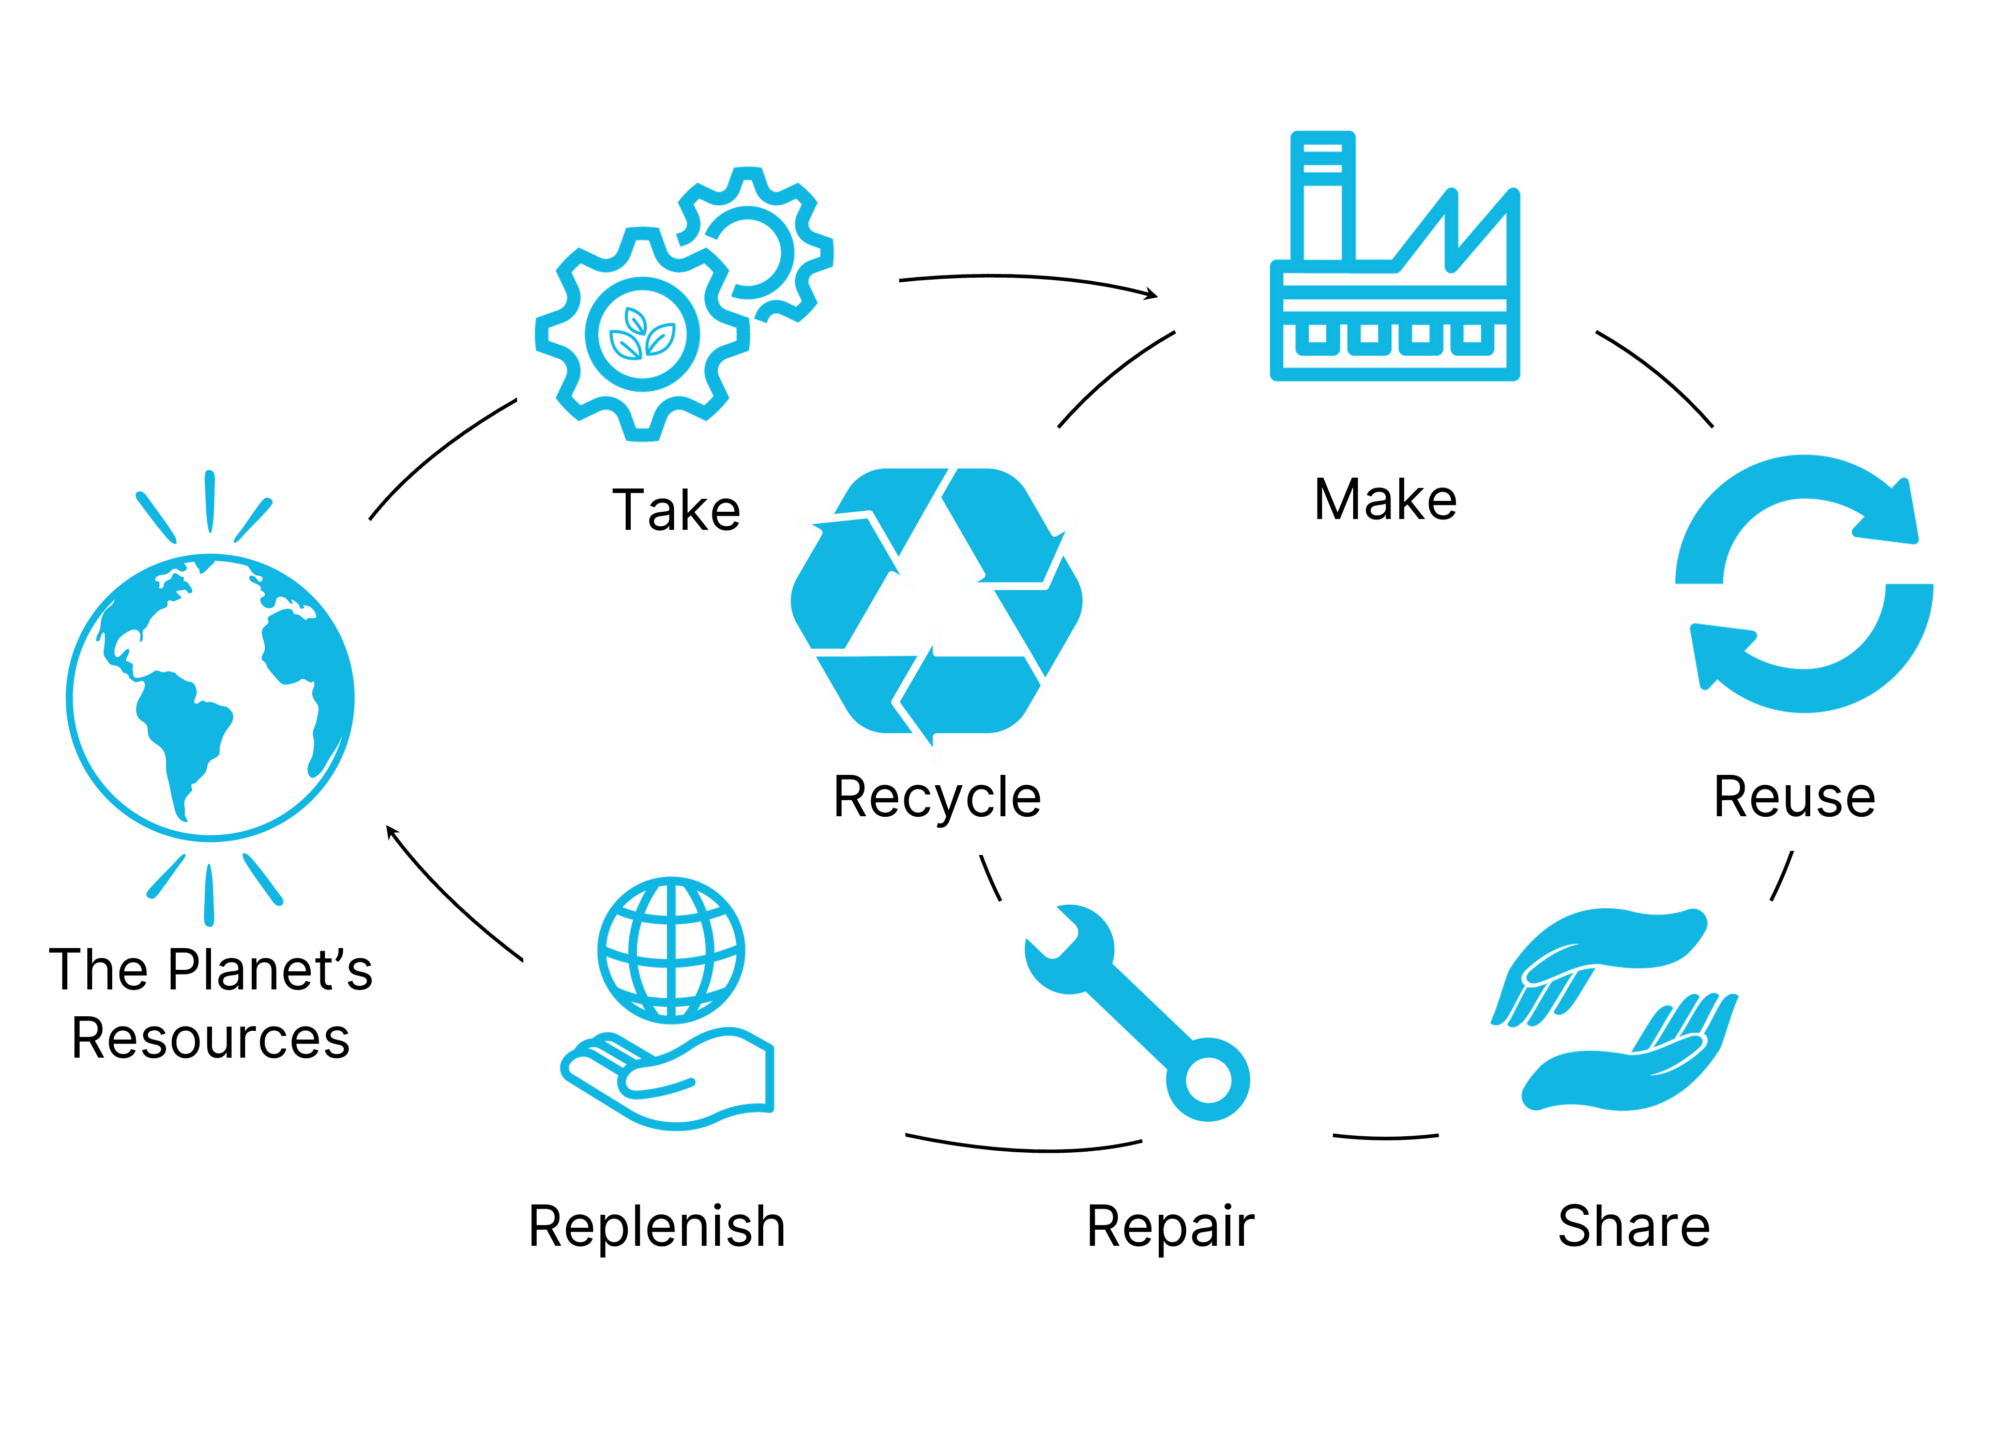 A circular economy infographic. The graphic is cyclical in nature, beginning with “The Planet’s Resources” (represented by a globe). From there, the steps are “Take” (represented by two gears and a leaf), “Make” (represented by a factory), “Reuse” (represented by two circular arrows in a loop), “Share” (represented by two hands hovering by one another), “Repair” (represented by a wrench). The cycle splits at Repair, with one path leading to “Recycle” (represented by the traditional Mobius arrow loop symbol), which then feeds back into the “Make” step. The second path from “Repair” goes to “Replenish” (represented by a palm with a globe hovering above), which connects back to “The Planet’s Resources”, the initial step.